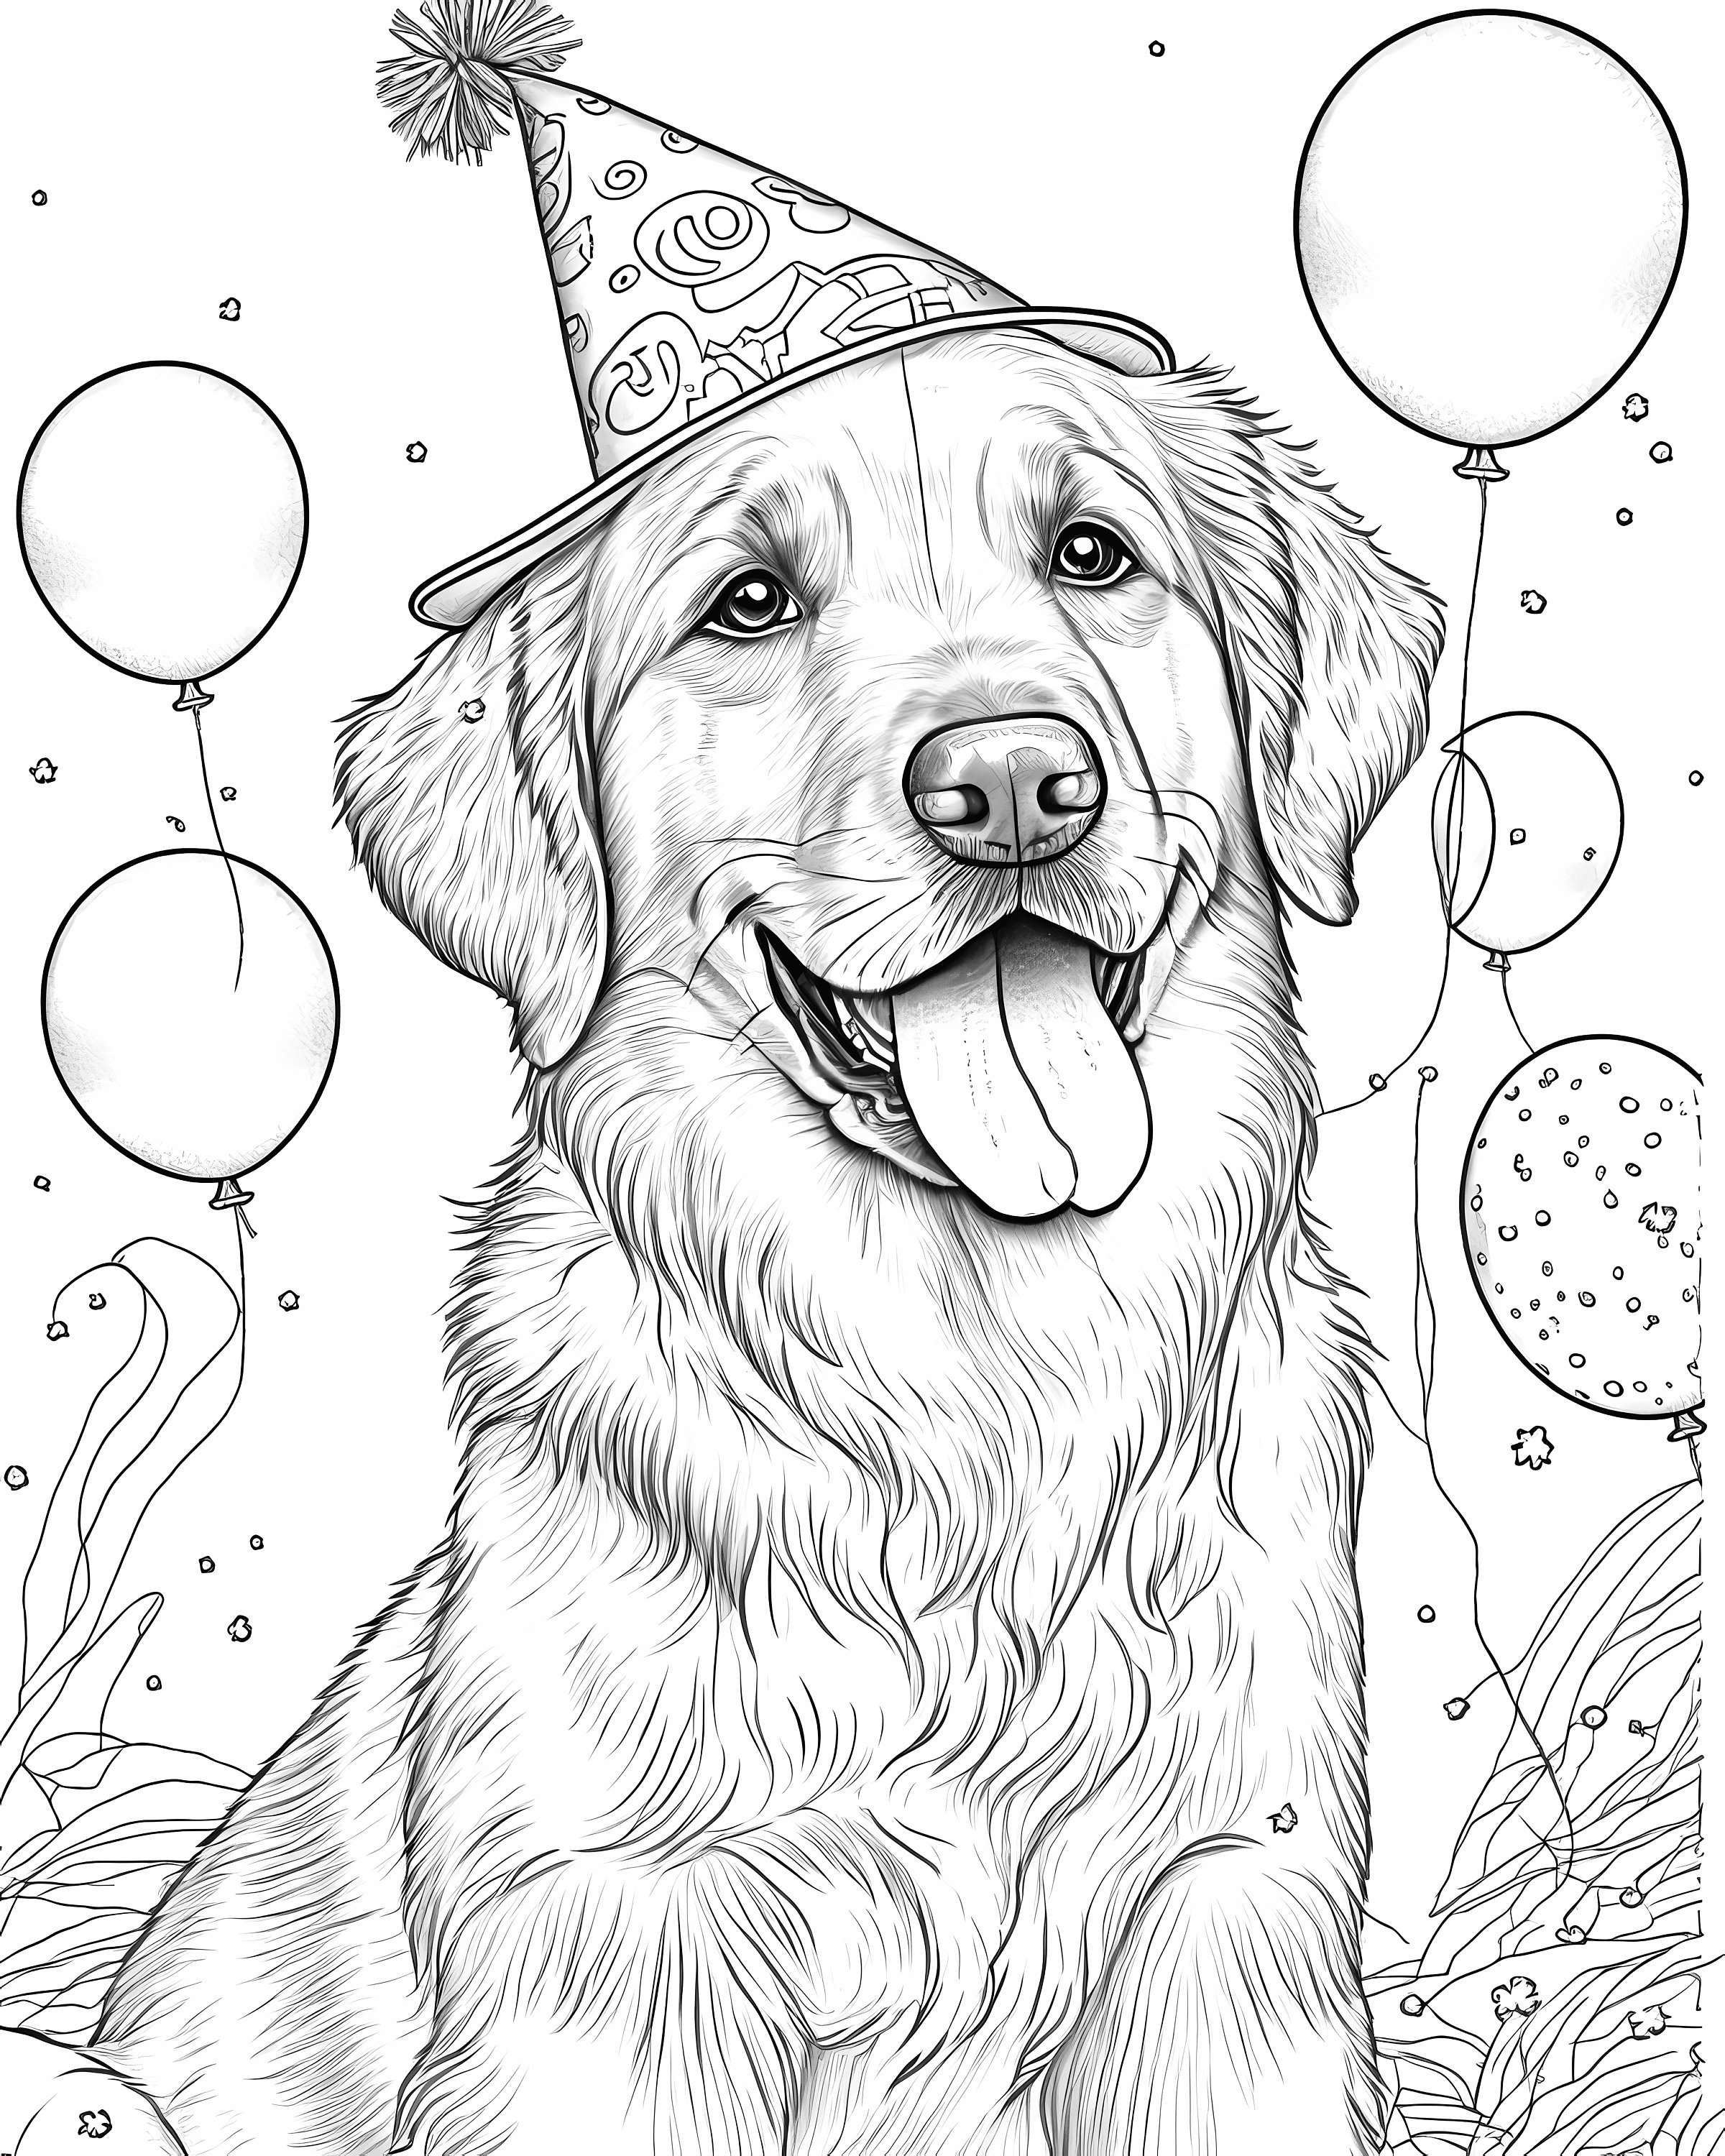 Golden retriever coloring book designs for kids adults and dog lovers coloring pages stress relief relaxation animal coloring books